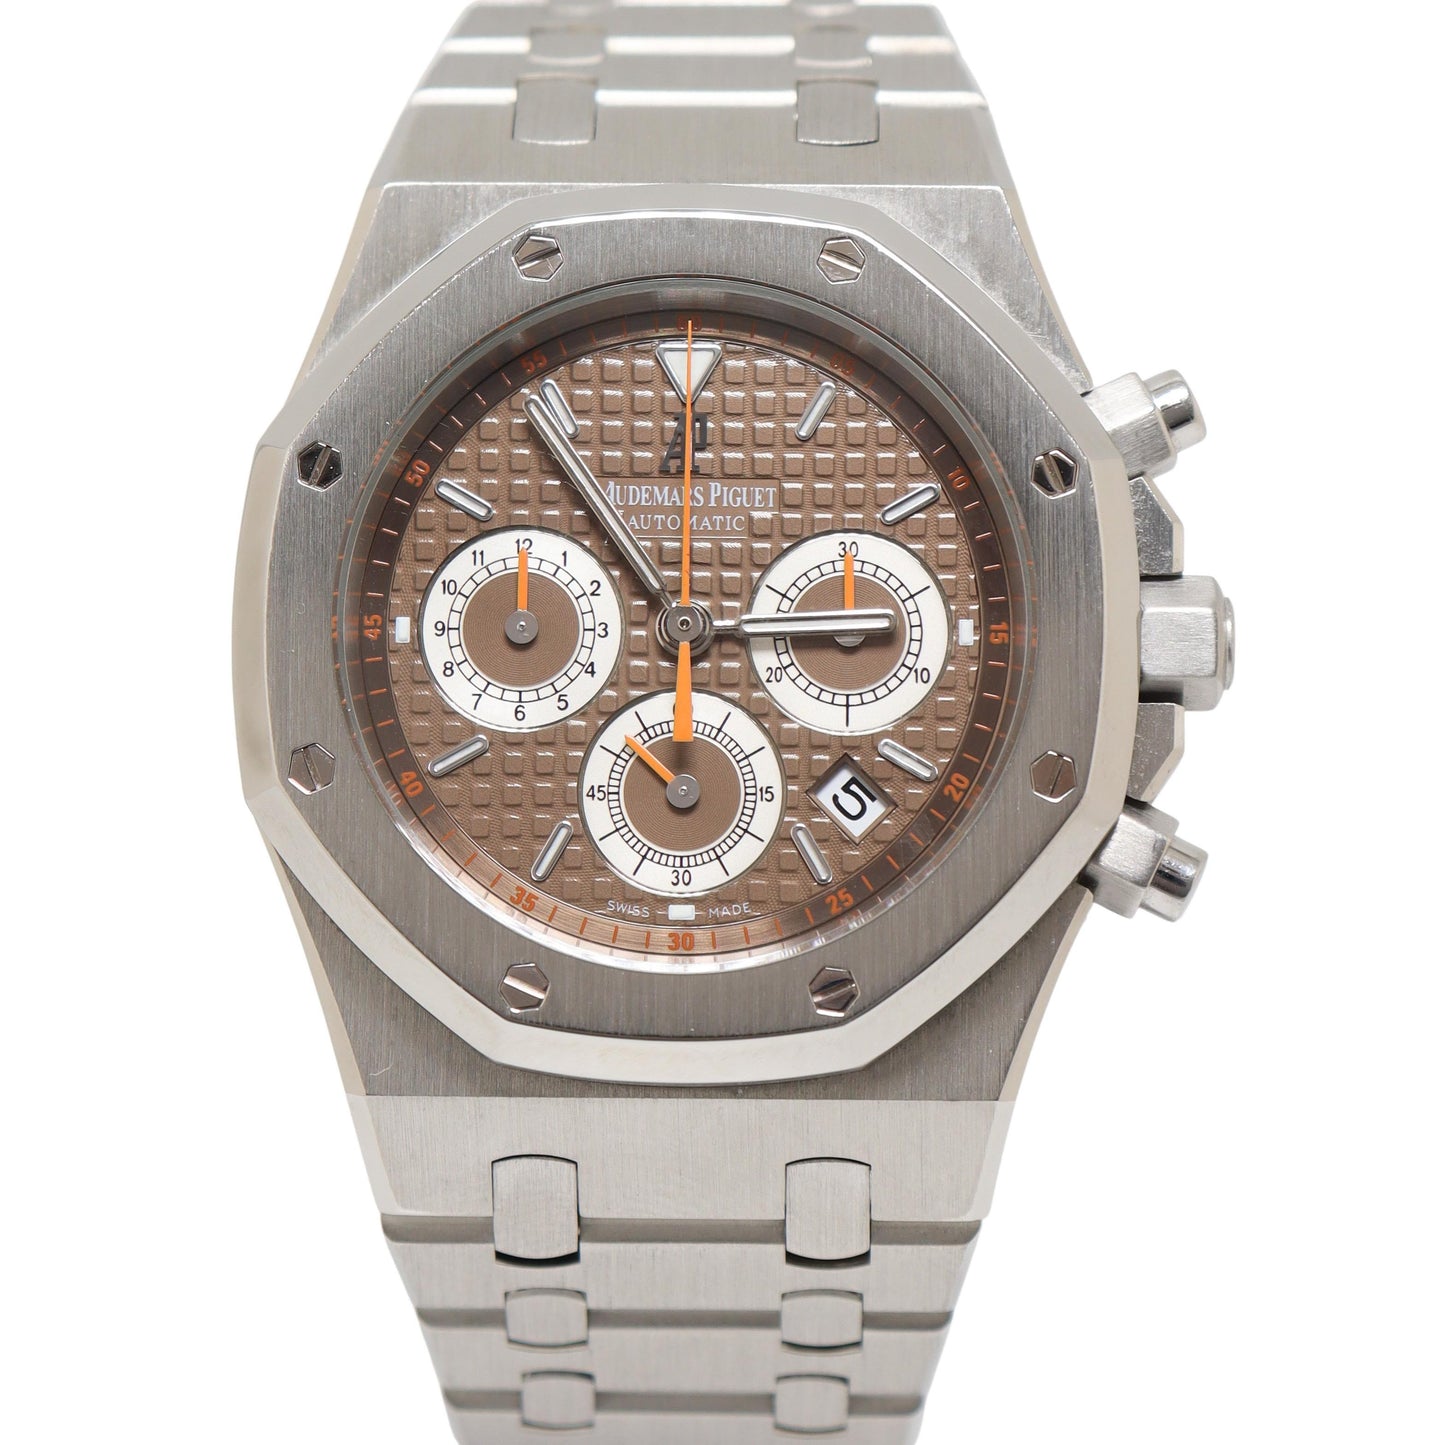 Audemars Piguet Royal Oak 39mm Stainless Steel Brown Chronograph Dial Watch Reference#: 26300ST.OO.1110ST.08 - Happy Jewelers Fine Jewelry Lifetime Warranty